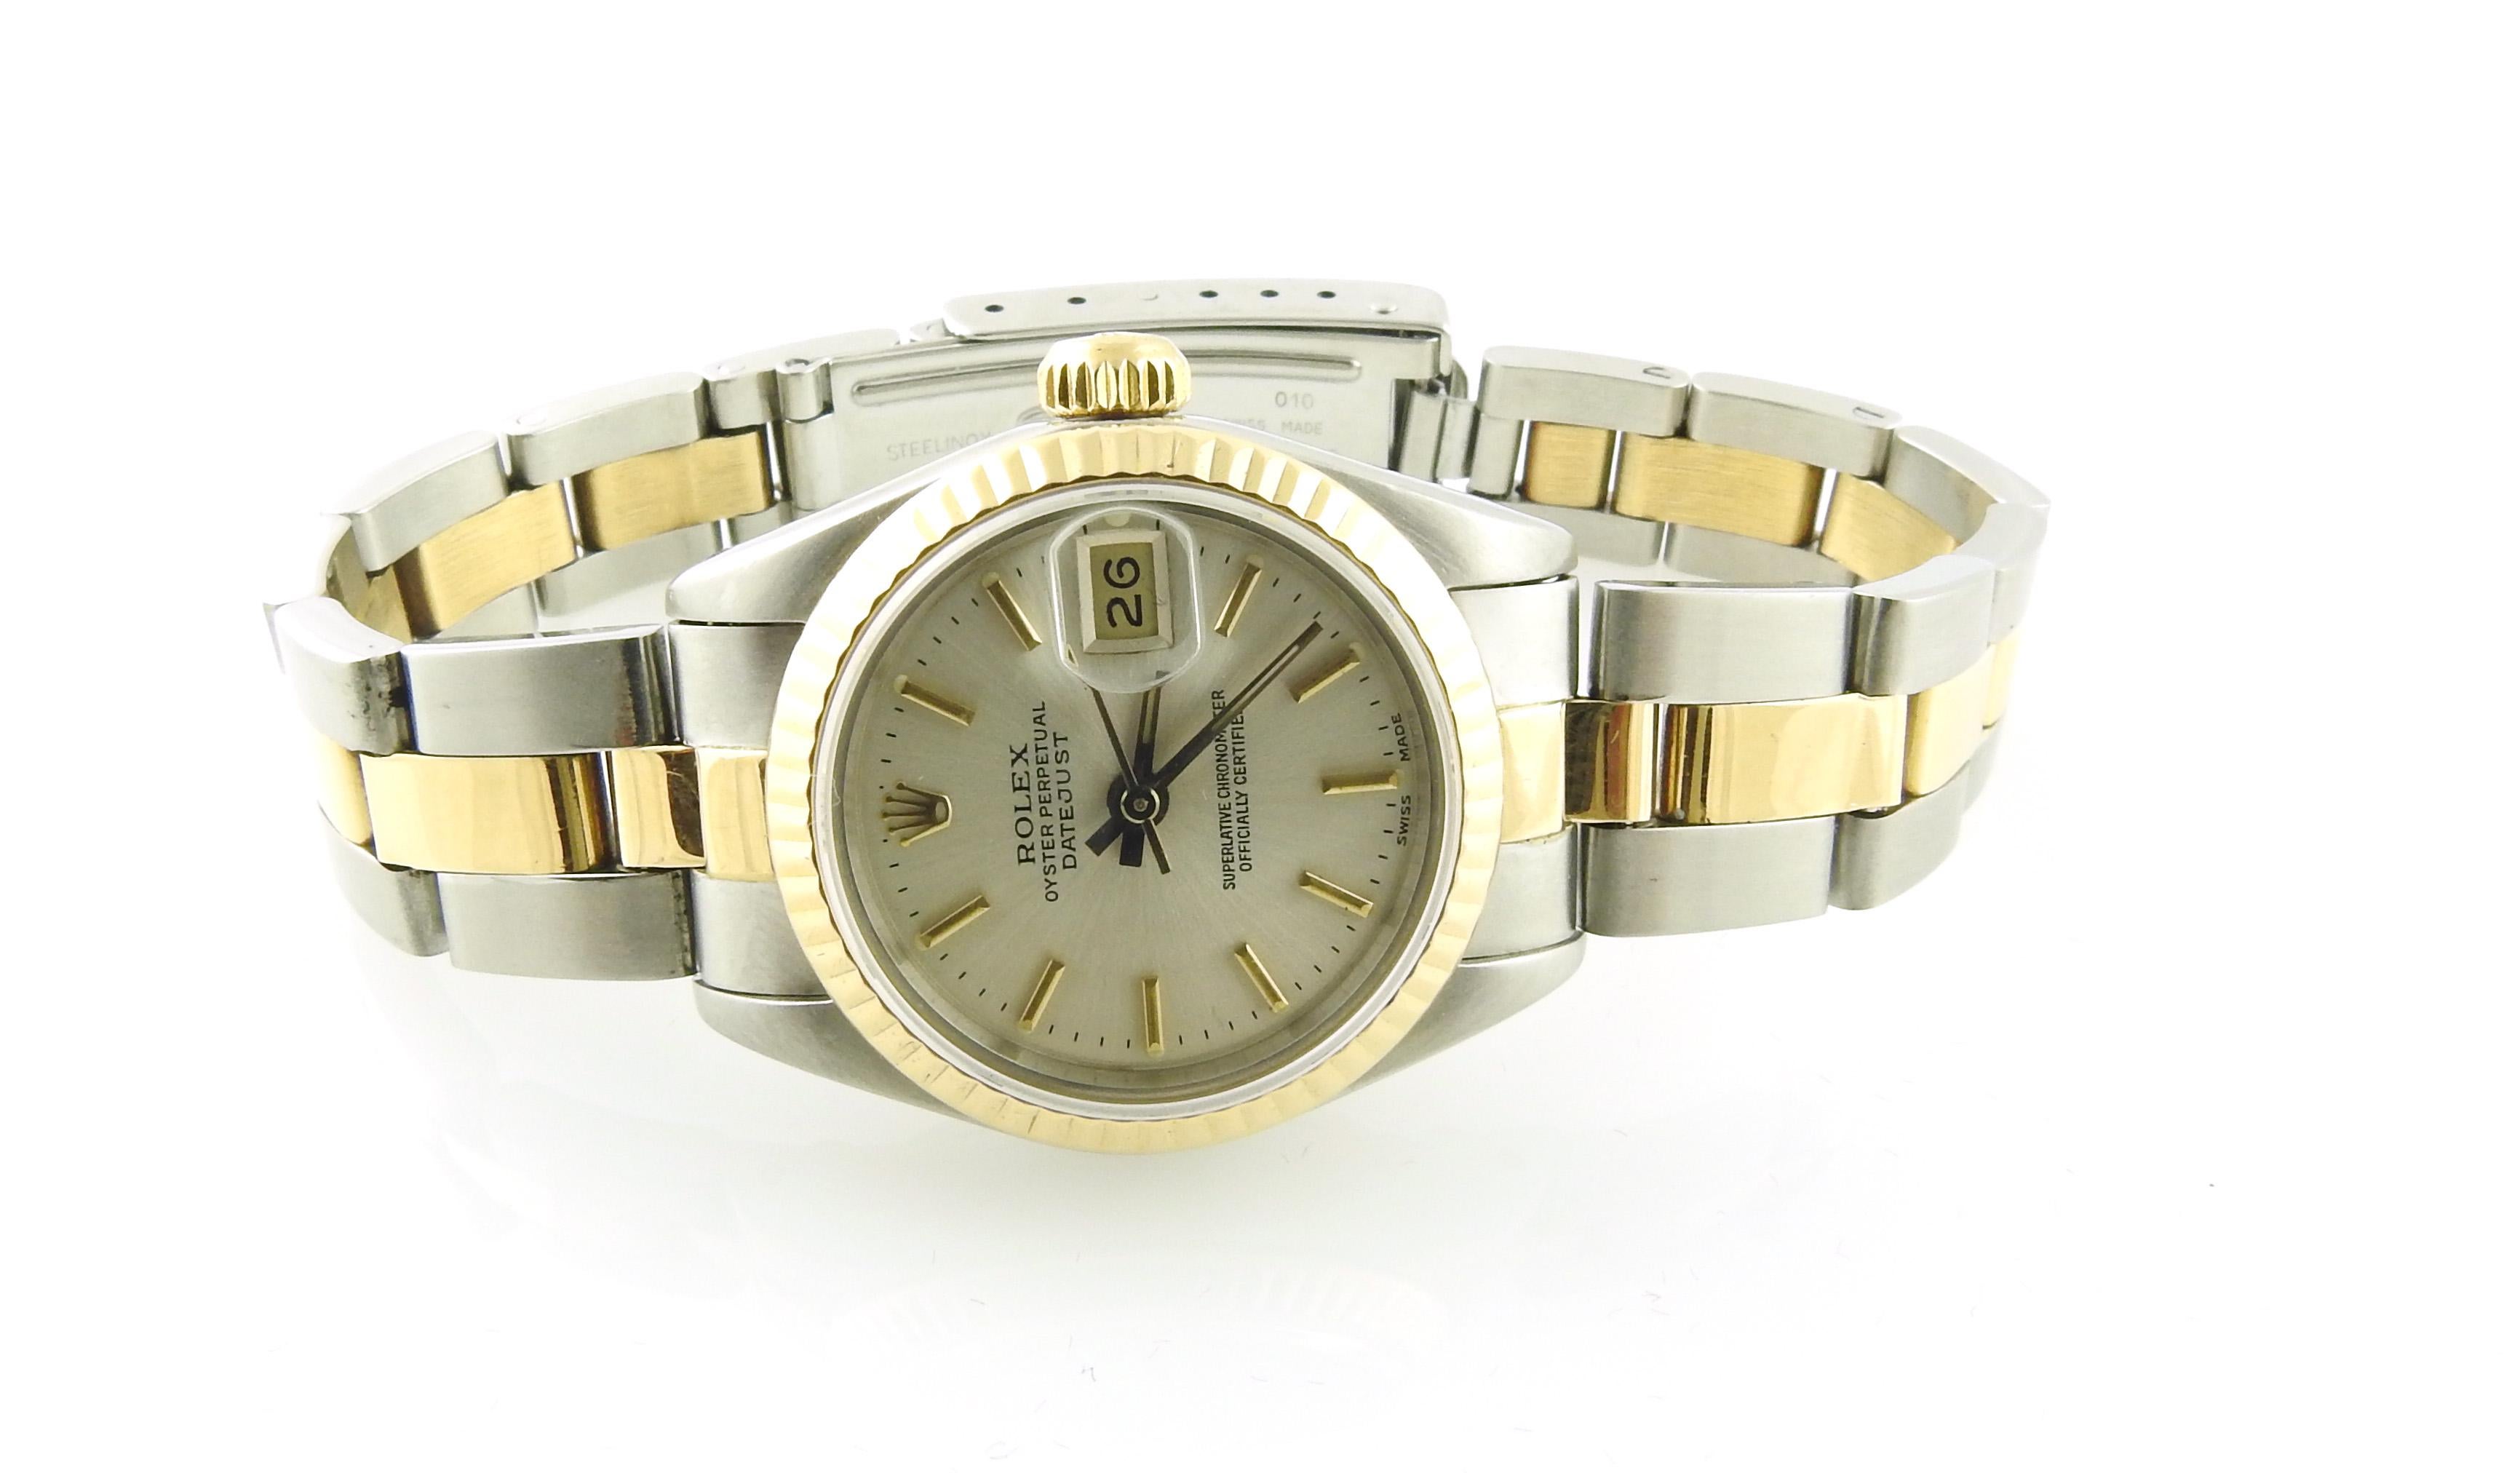 1990 Rolex Ladies Datejust Tow Tone Watch Silver Dial 69173 Box, Papers, Tag 3